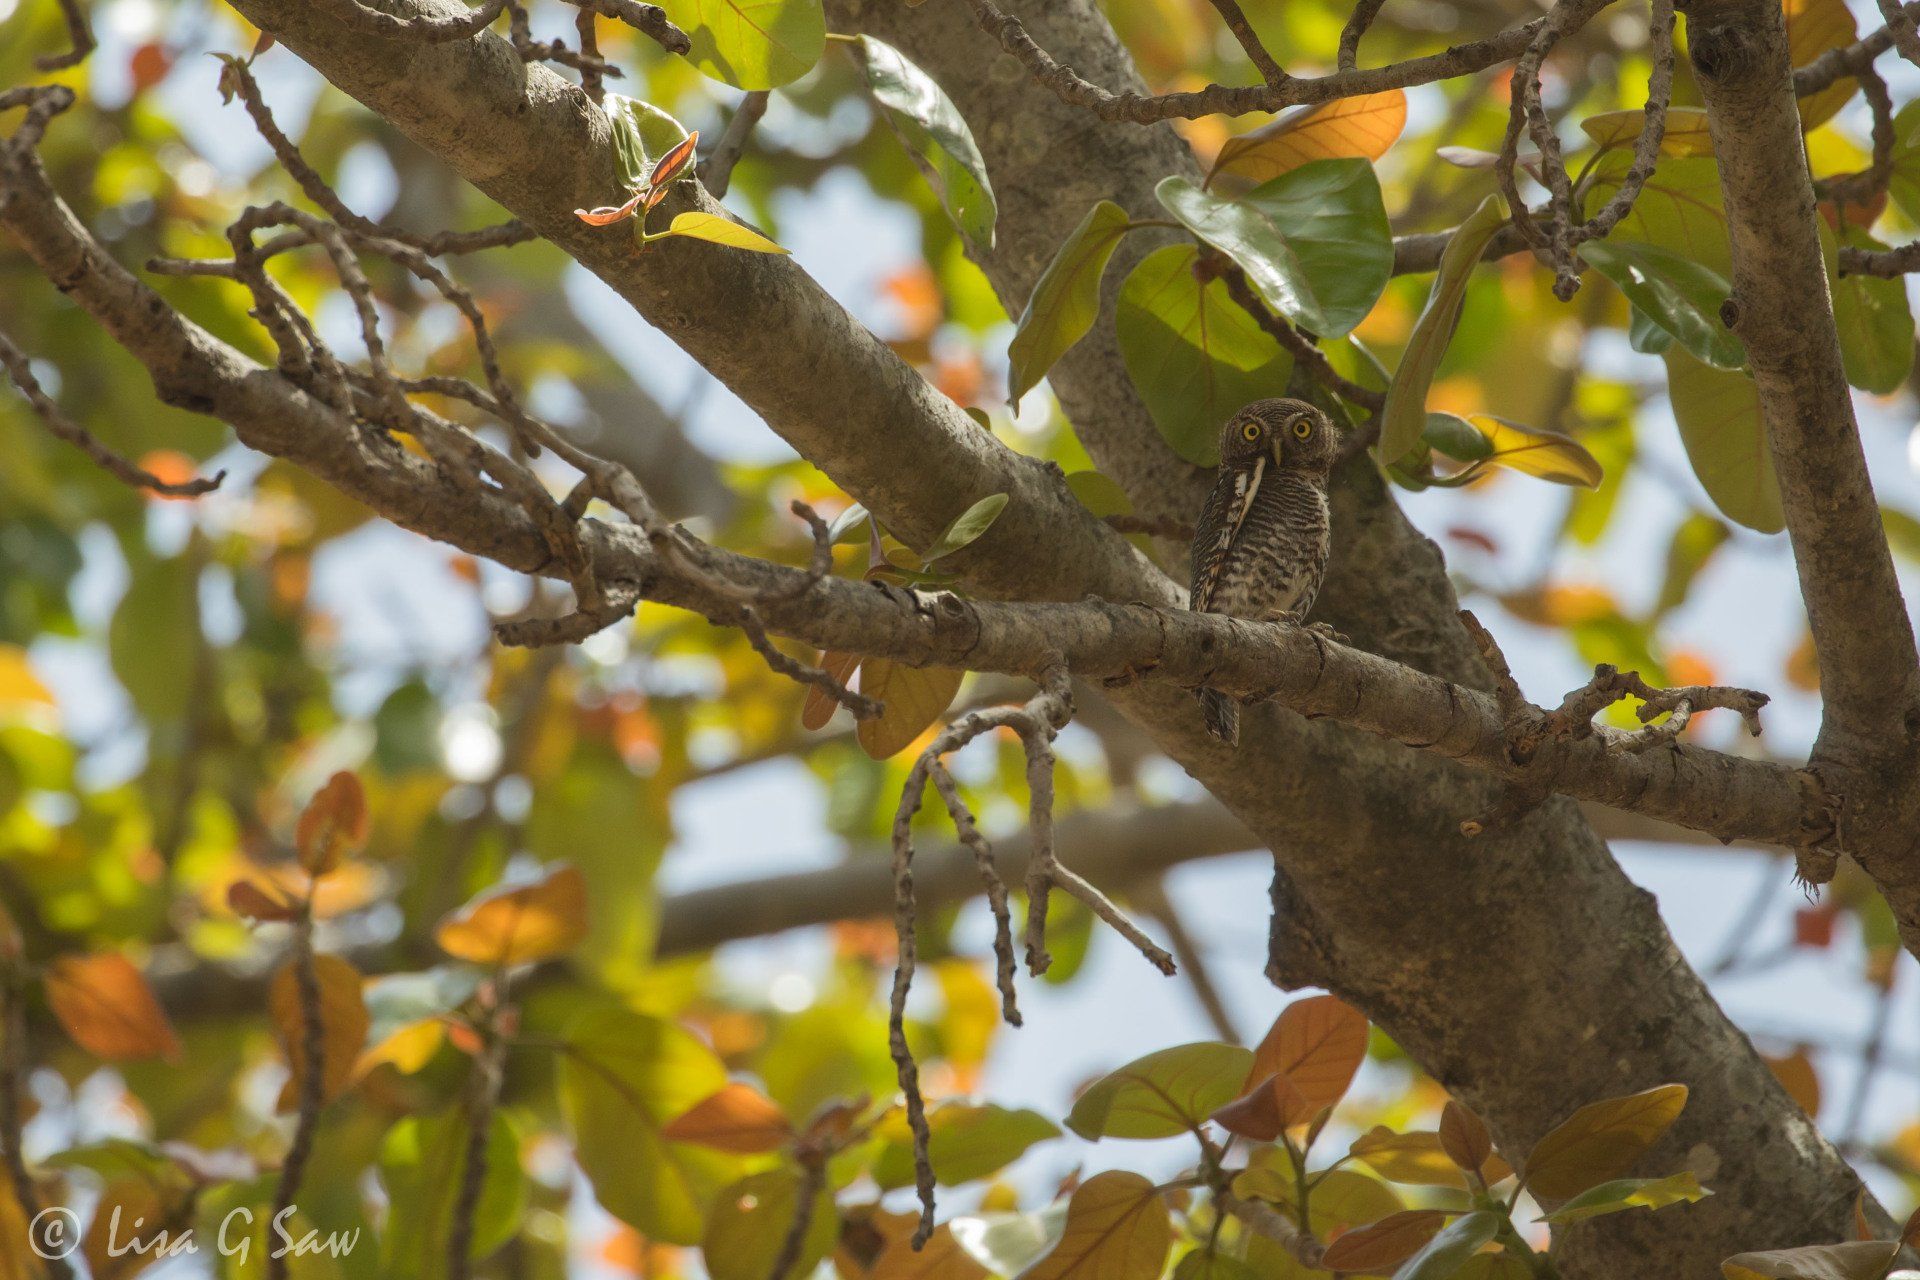 Asian Barred Owlet with bright yellow eyes sitting on branch